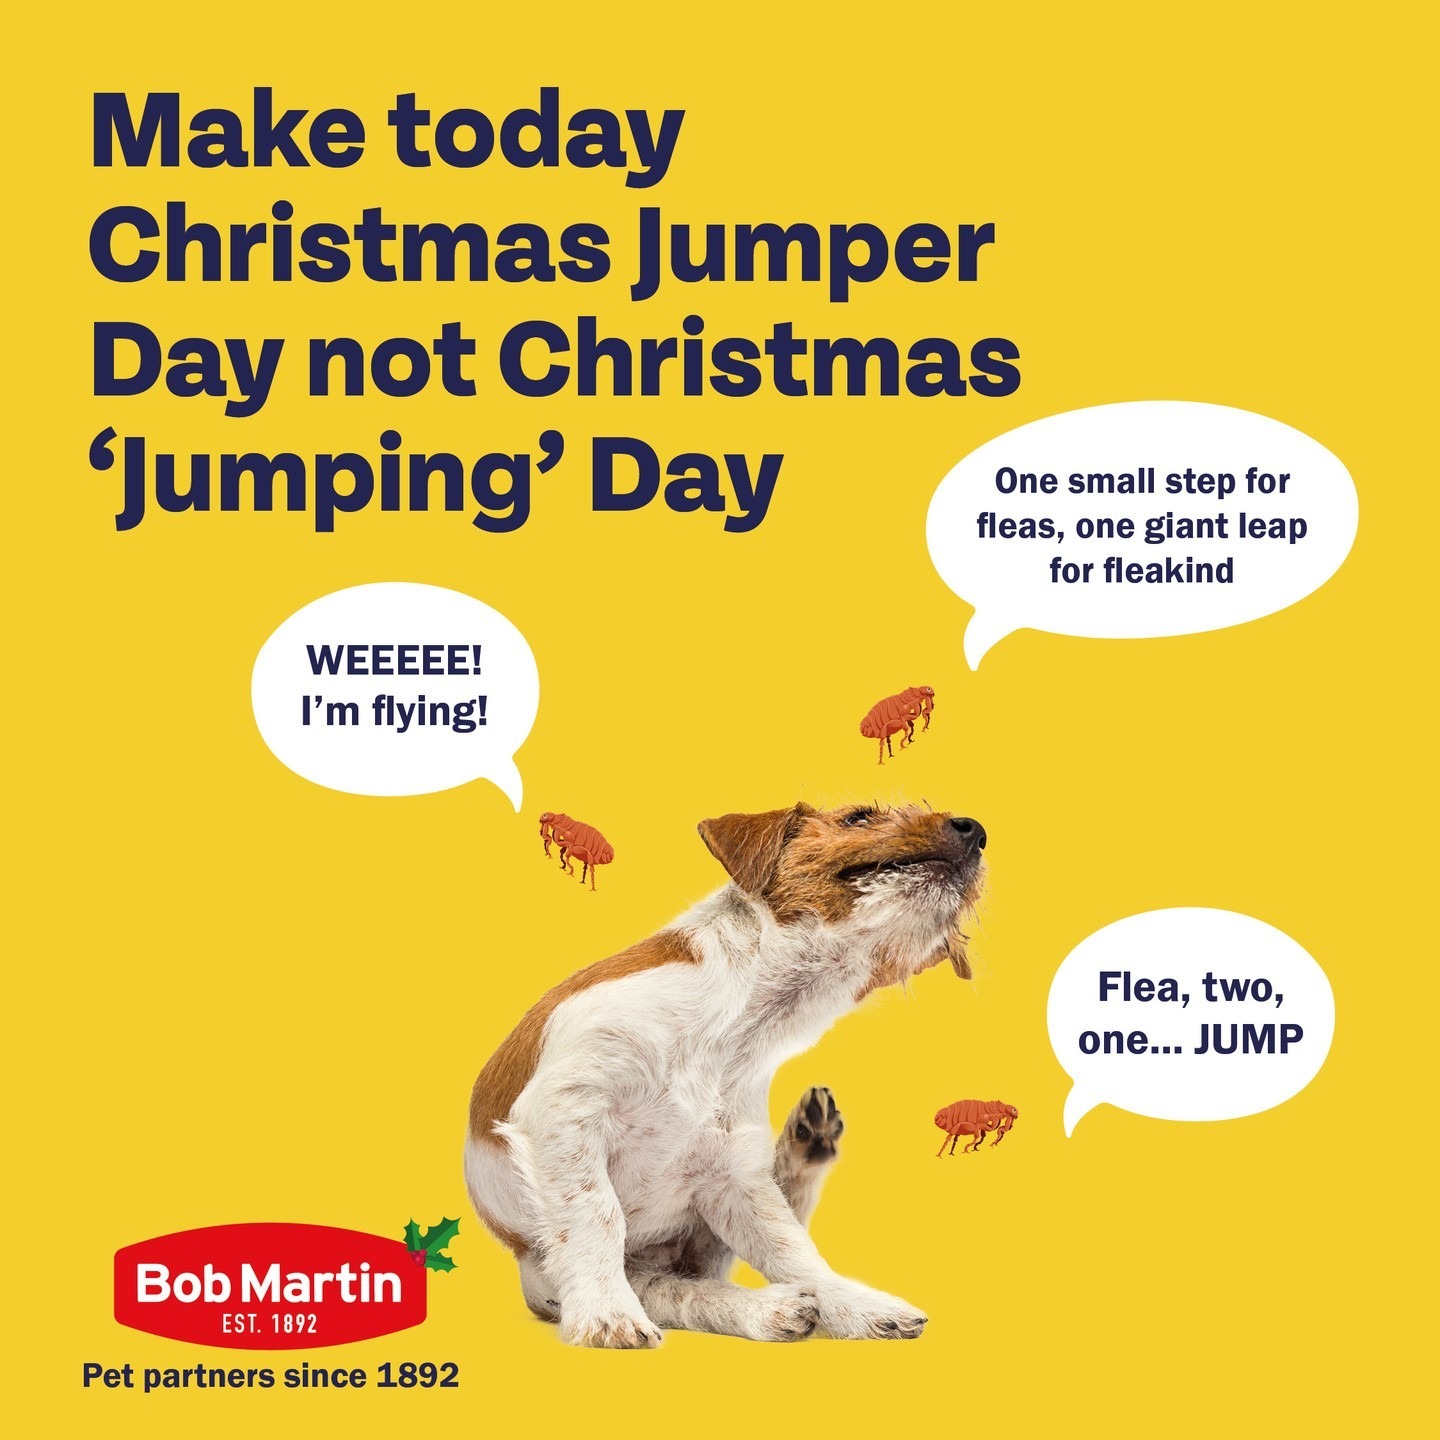 Put those pesky fleas in their place this #ChristmasJumperDay by protecting your pet with our repellent range!

Available to shop via link in bio 

 #BobMartin #PetHealthcare #Flea #Worm #Dog #Cat #SpotOn #Pets #PetsOfInstagram #PetCare #PetTips #PetHealth #HealthyPets #ActivePets